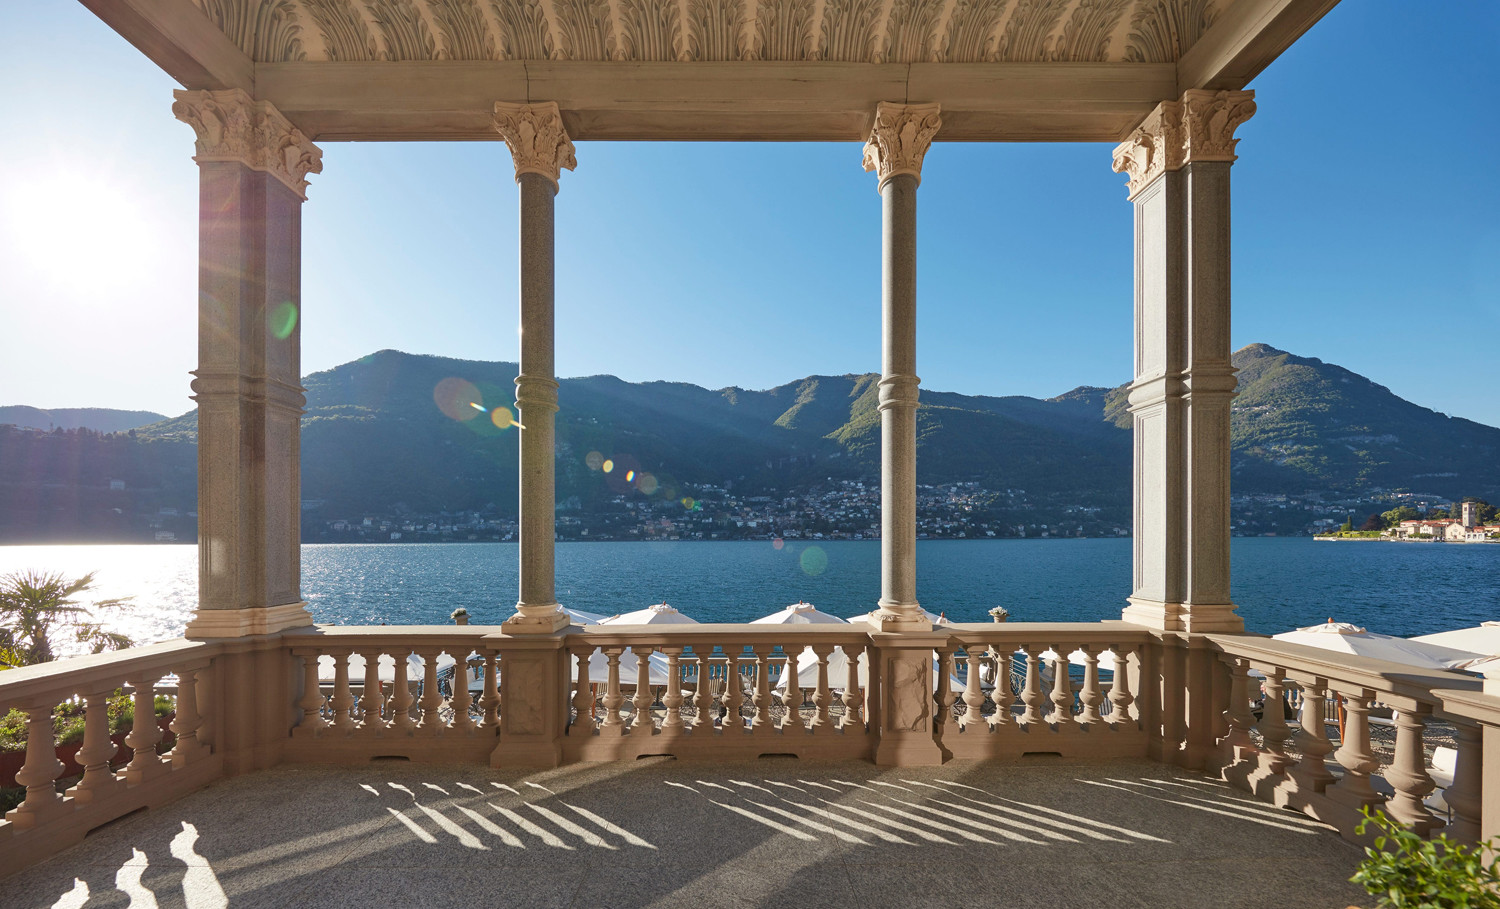 news-main-mandarin-oriental-lago-di-como-opens-on-18-june-2020-with-a-restart-and-relax-package.1590833982.jpg